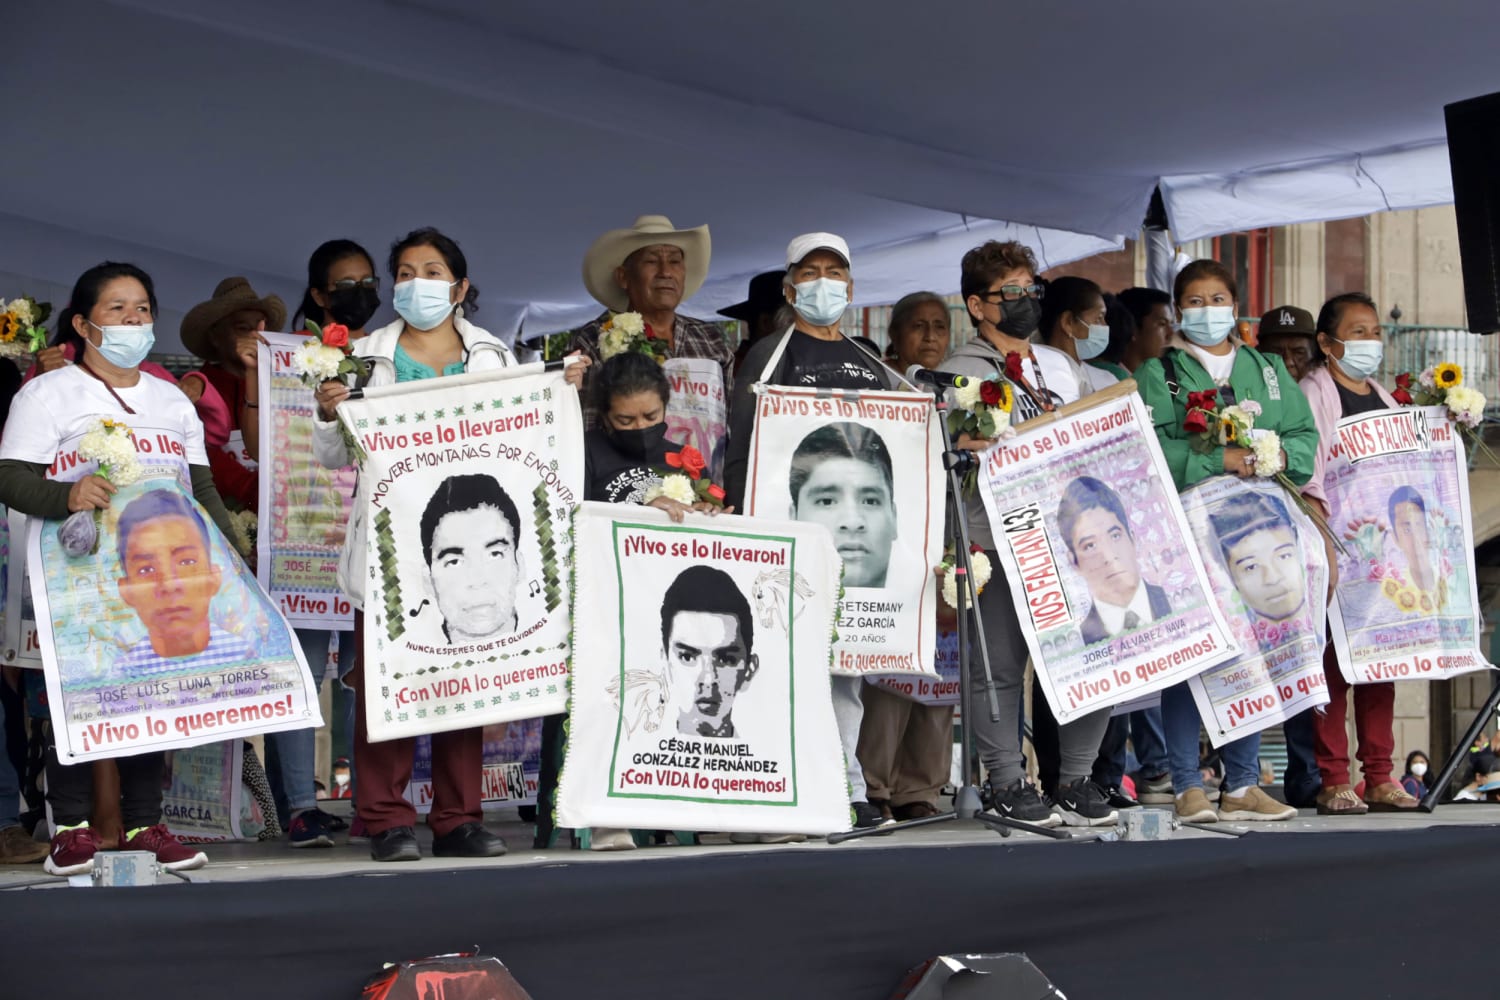 Moms in Mexico keep searching for the missing, even as officials rallied to find the kidnapped Americans